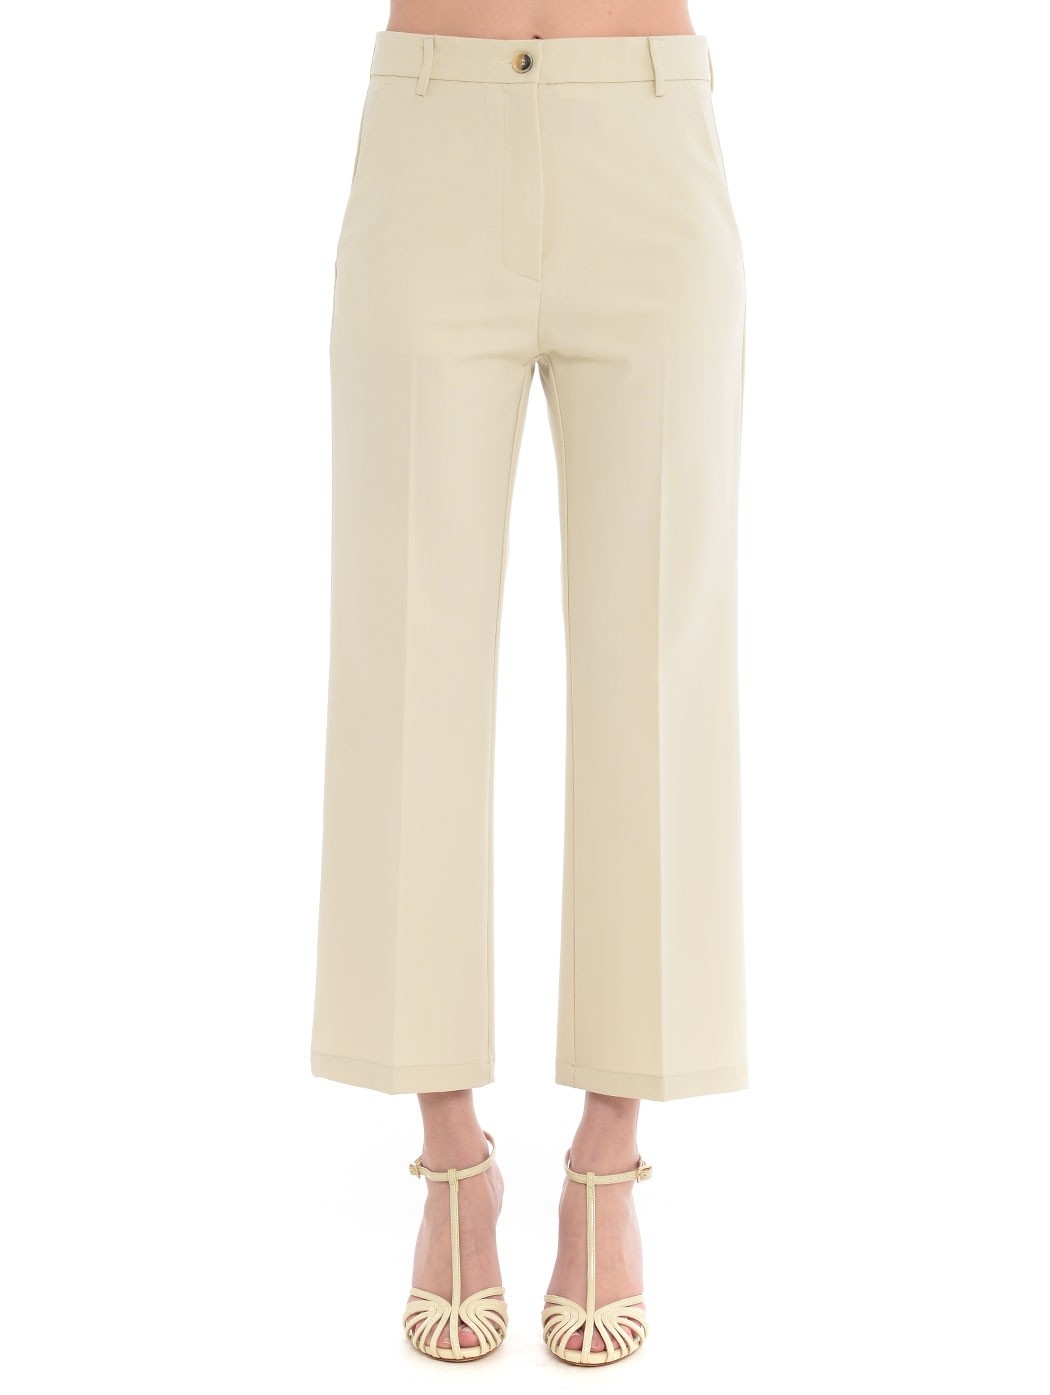  WOMAN TROUSERS,PALAZZO TROUSERS,SKINNY TROUSERS,MARNI TROUSERS,FORTE FORTE TROUSERS,8PM TROUSERS,MSGM TROUSERS,CROP PANTS  SEMICOUTURE Y3SI06